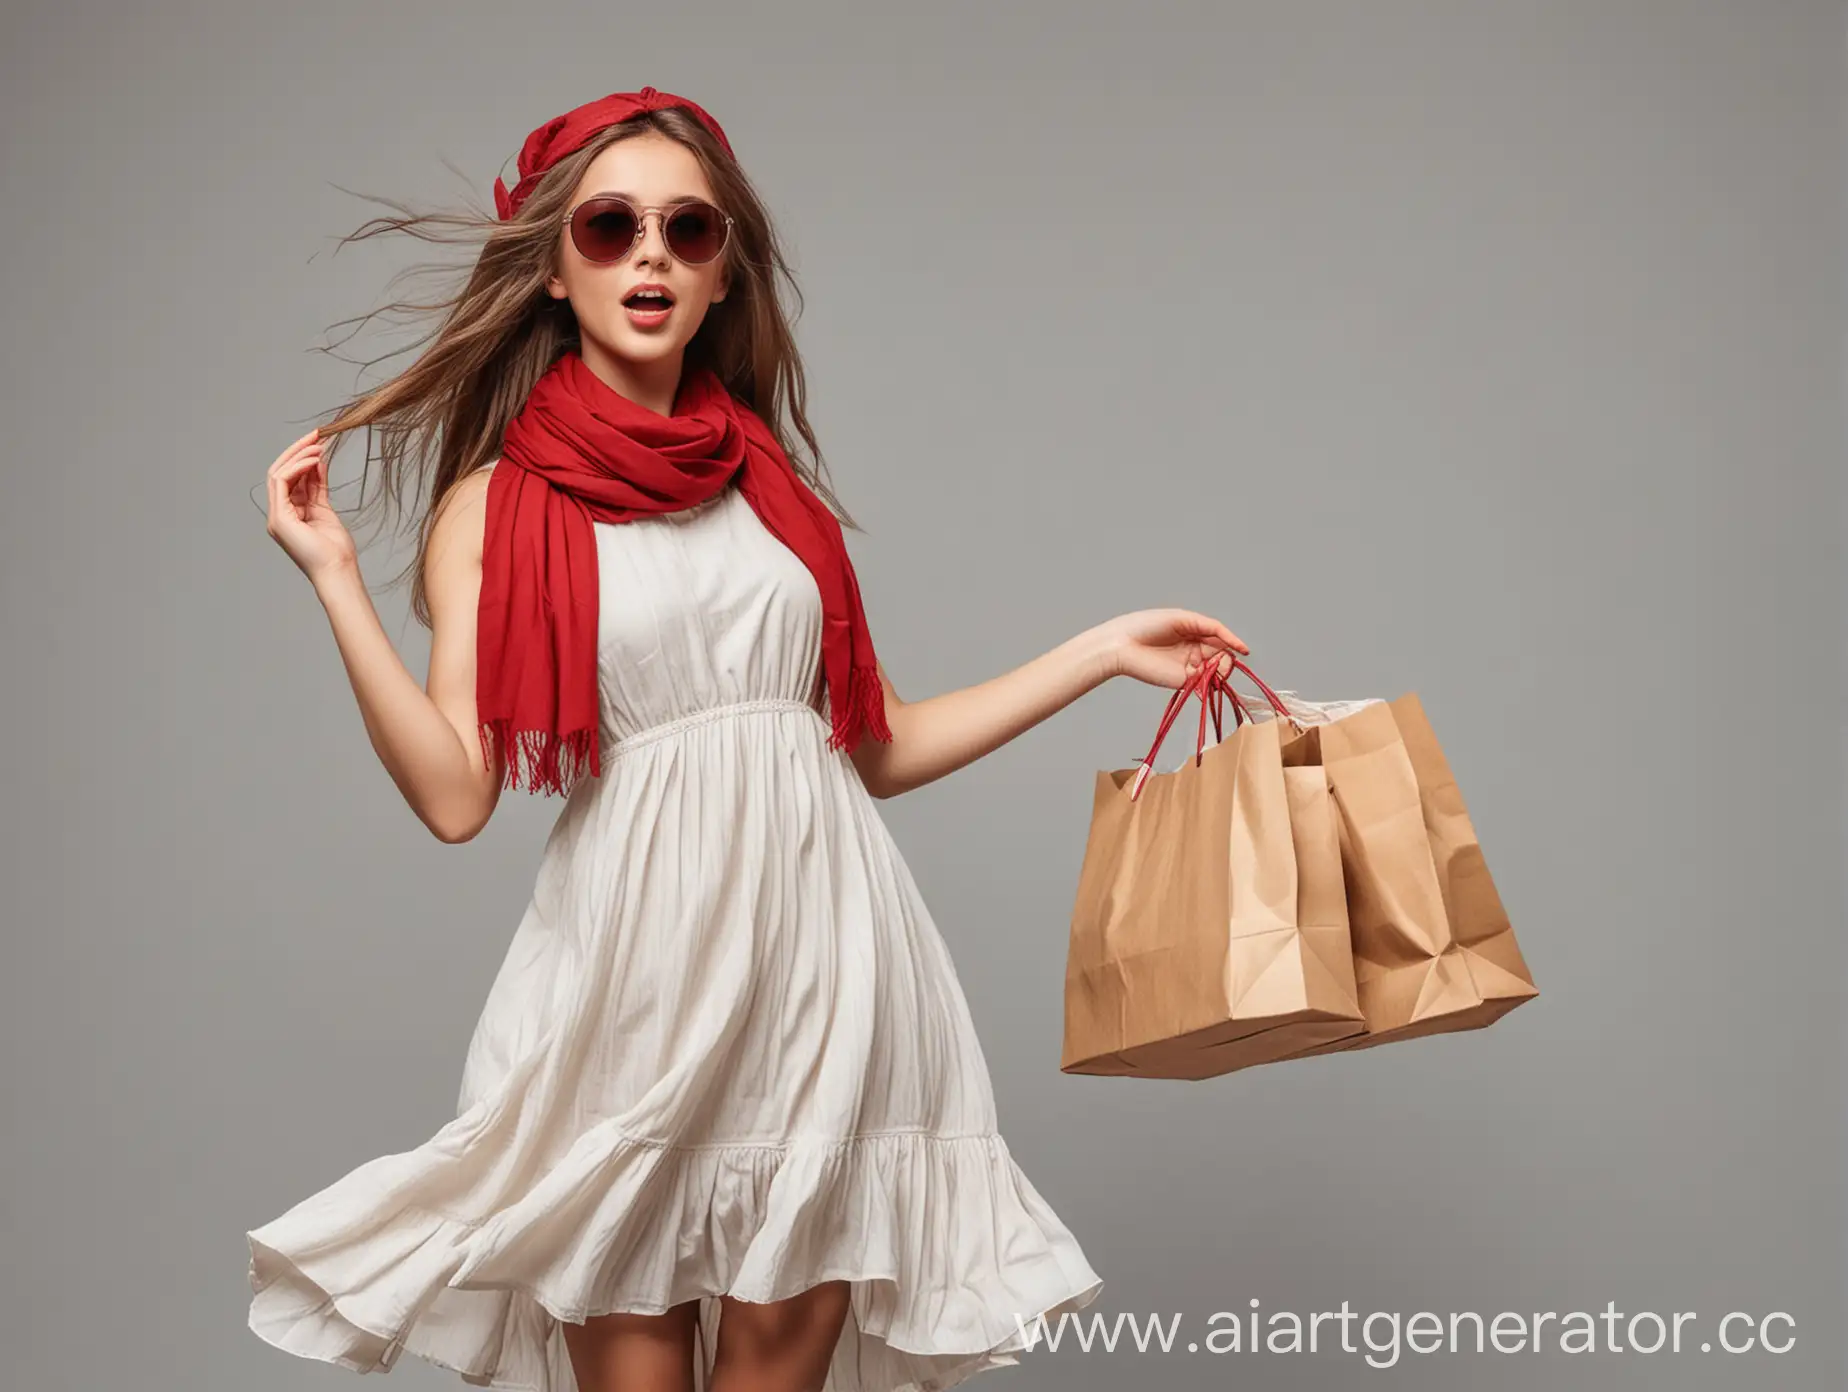 Stylish-Girl-with-Shopping-Bags-and-Windblown-Dress